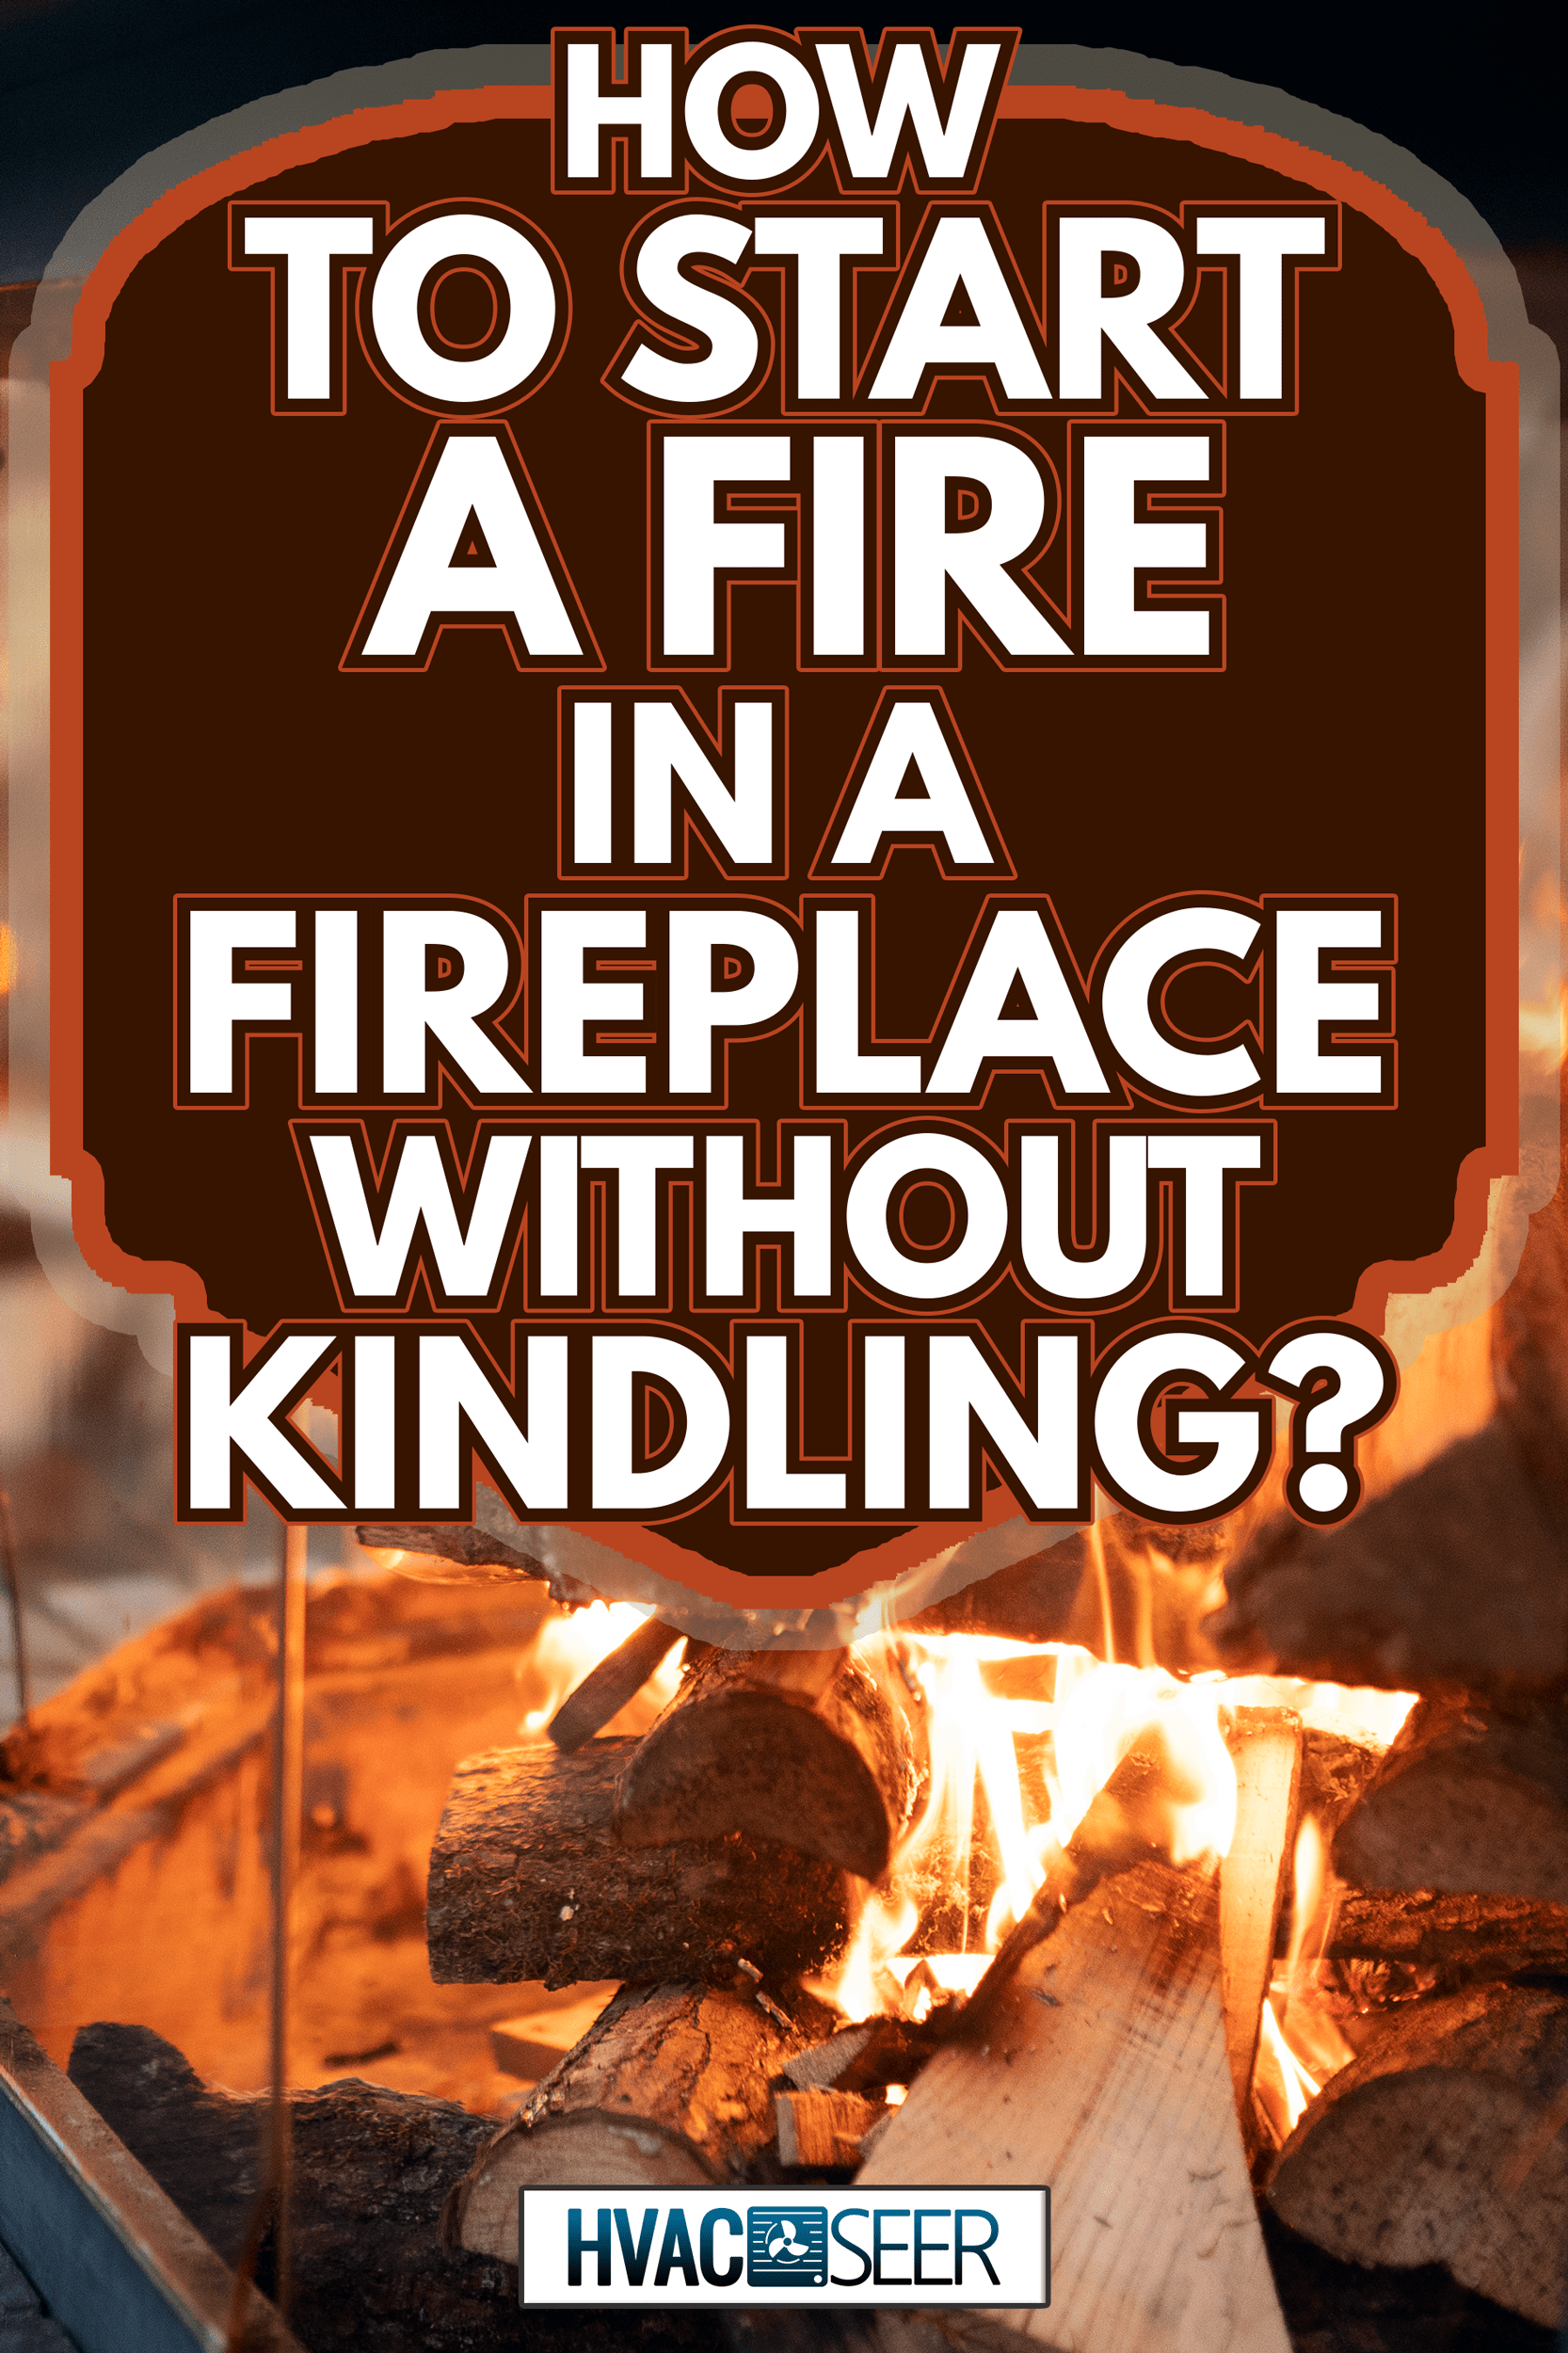 Fireplace at the cafe - How To Start A Fire In A Fireplace Without Kindling